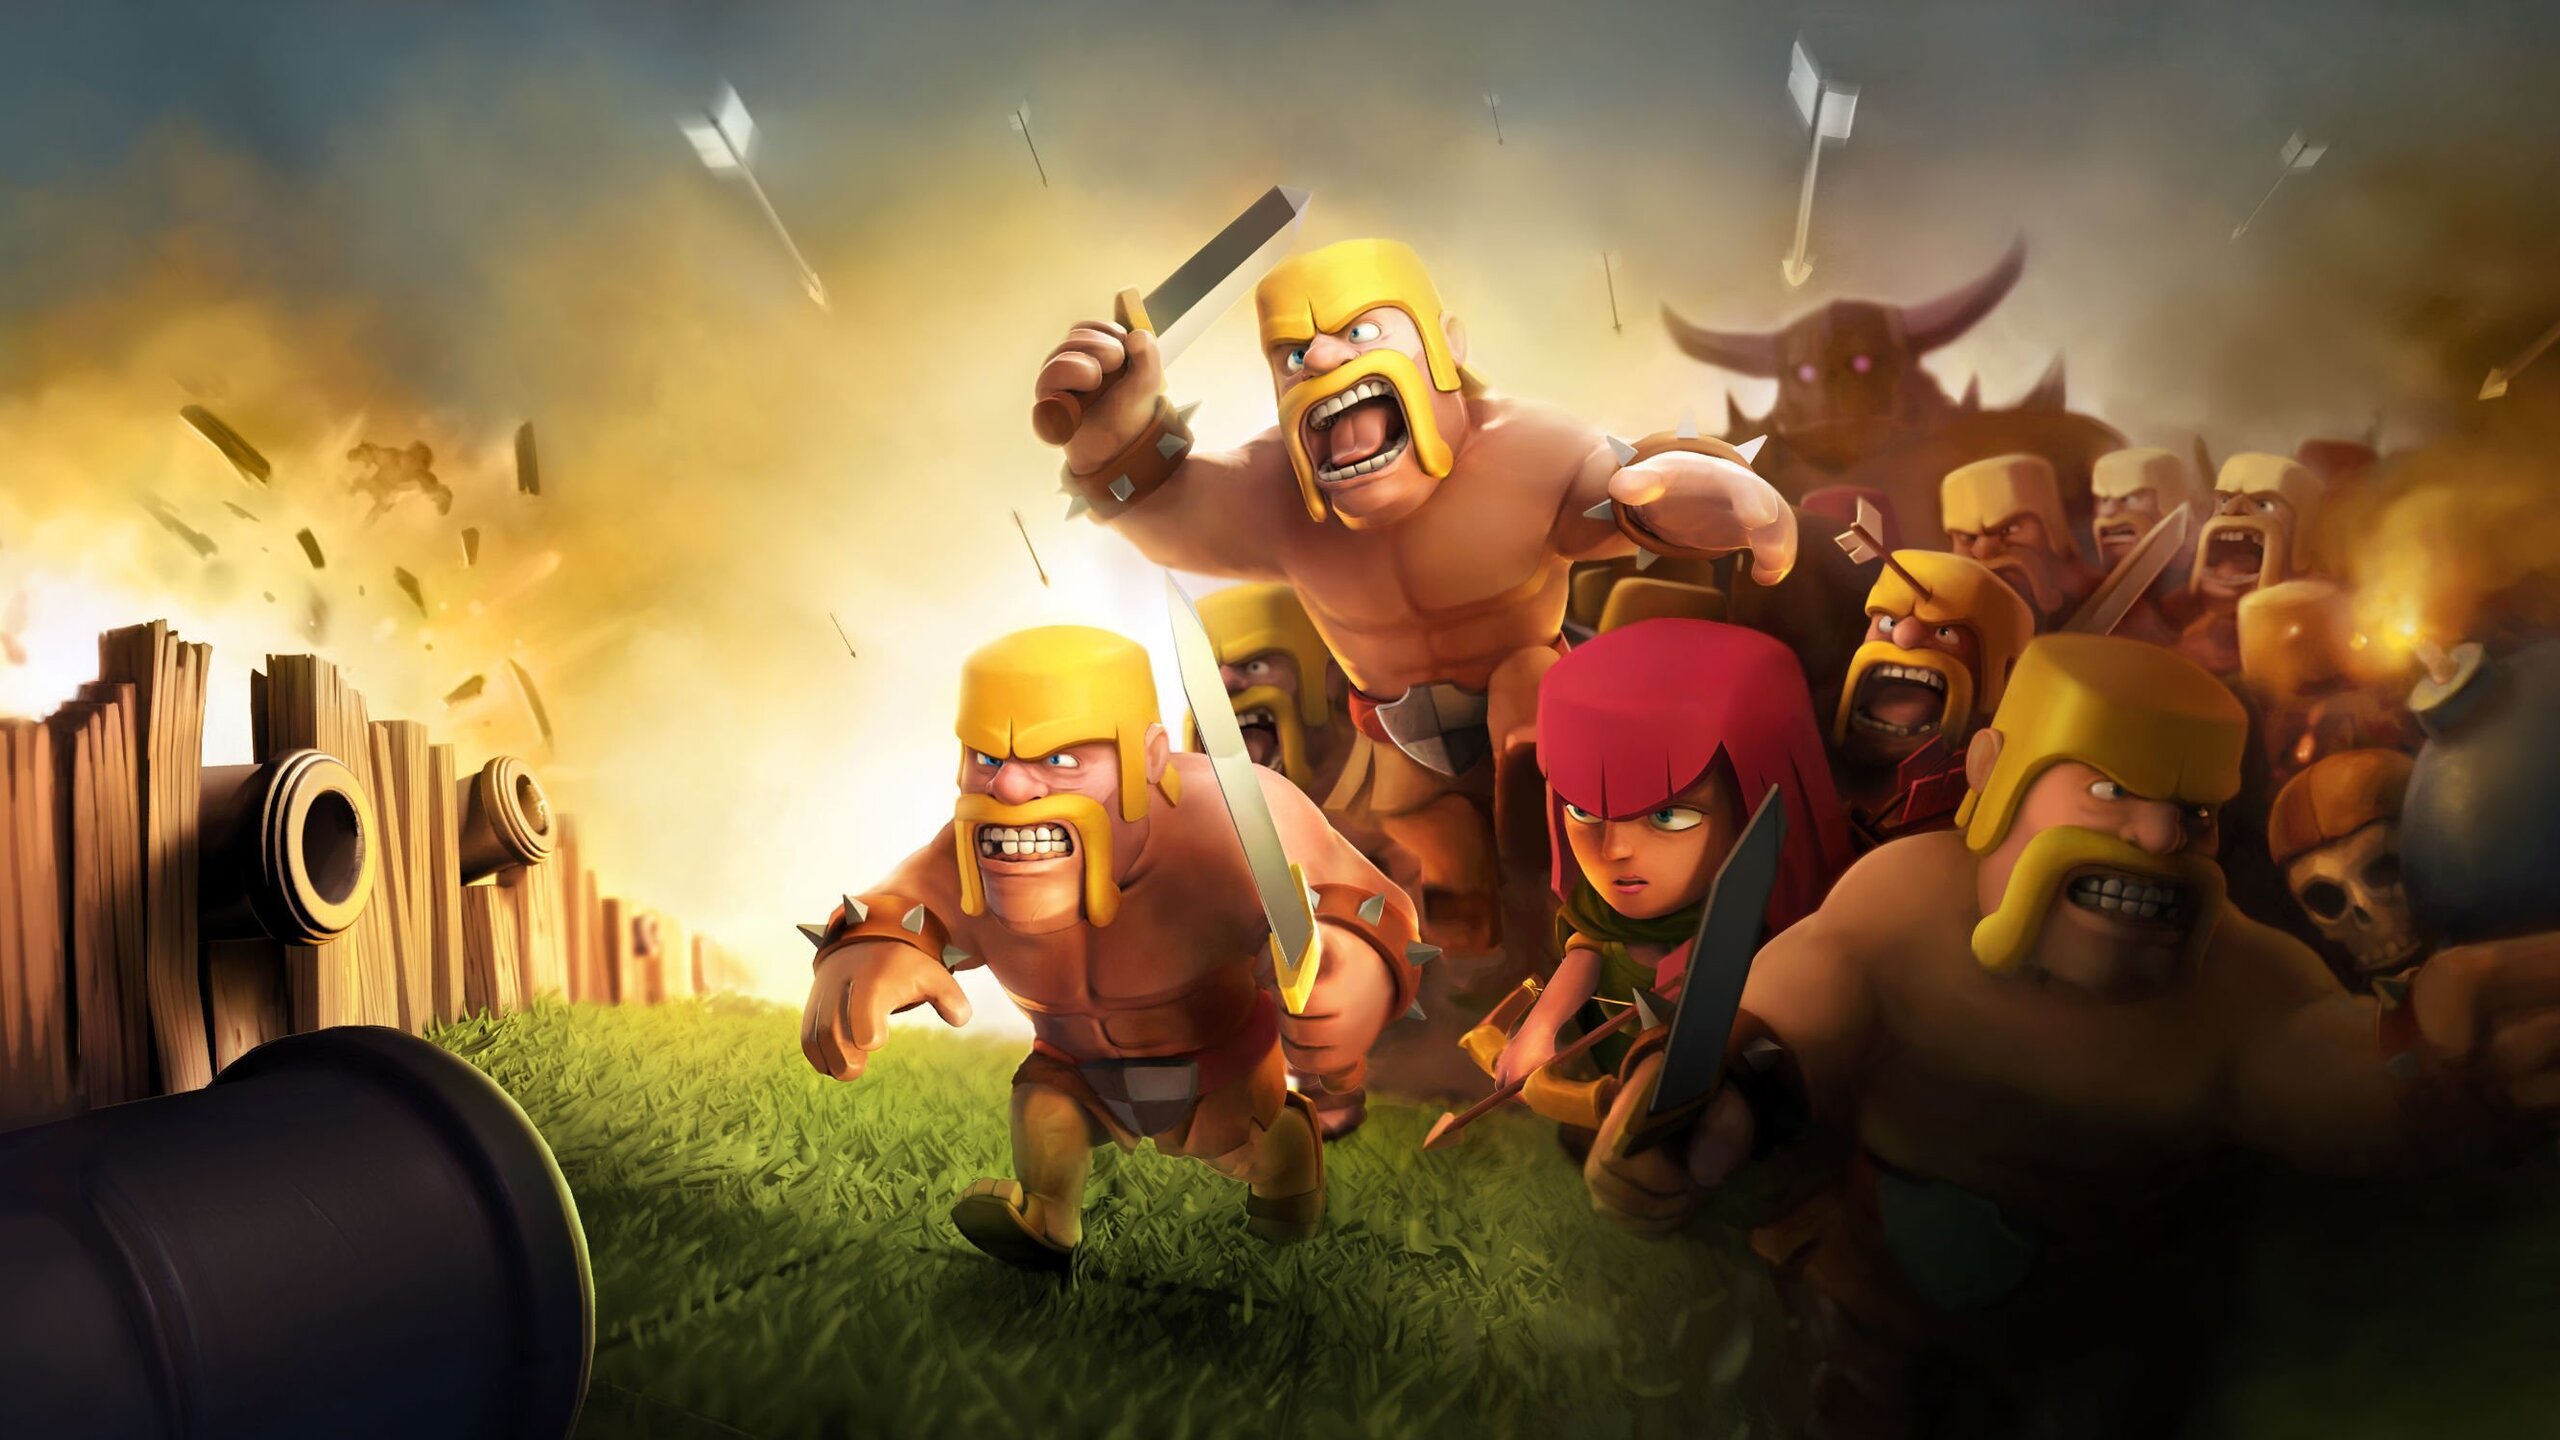 clash of clans wallpaper 1920x1080,animated cartoon,animation,pc game,strategy video game,games